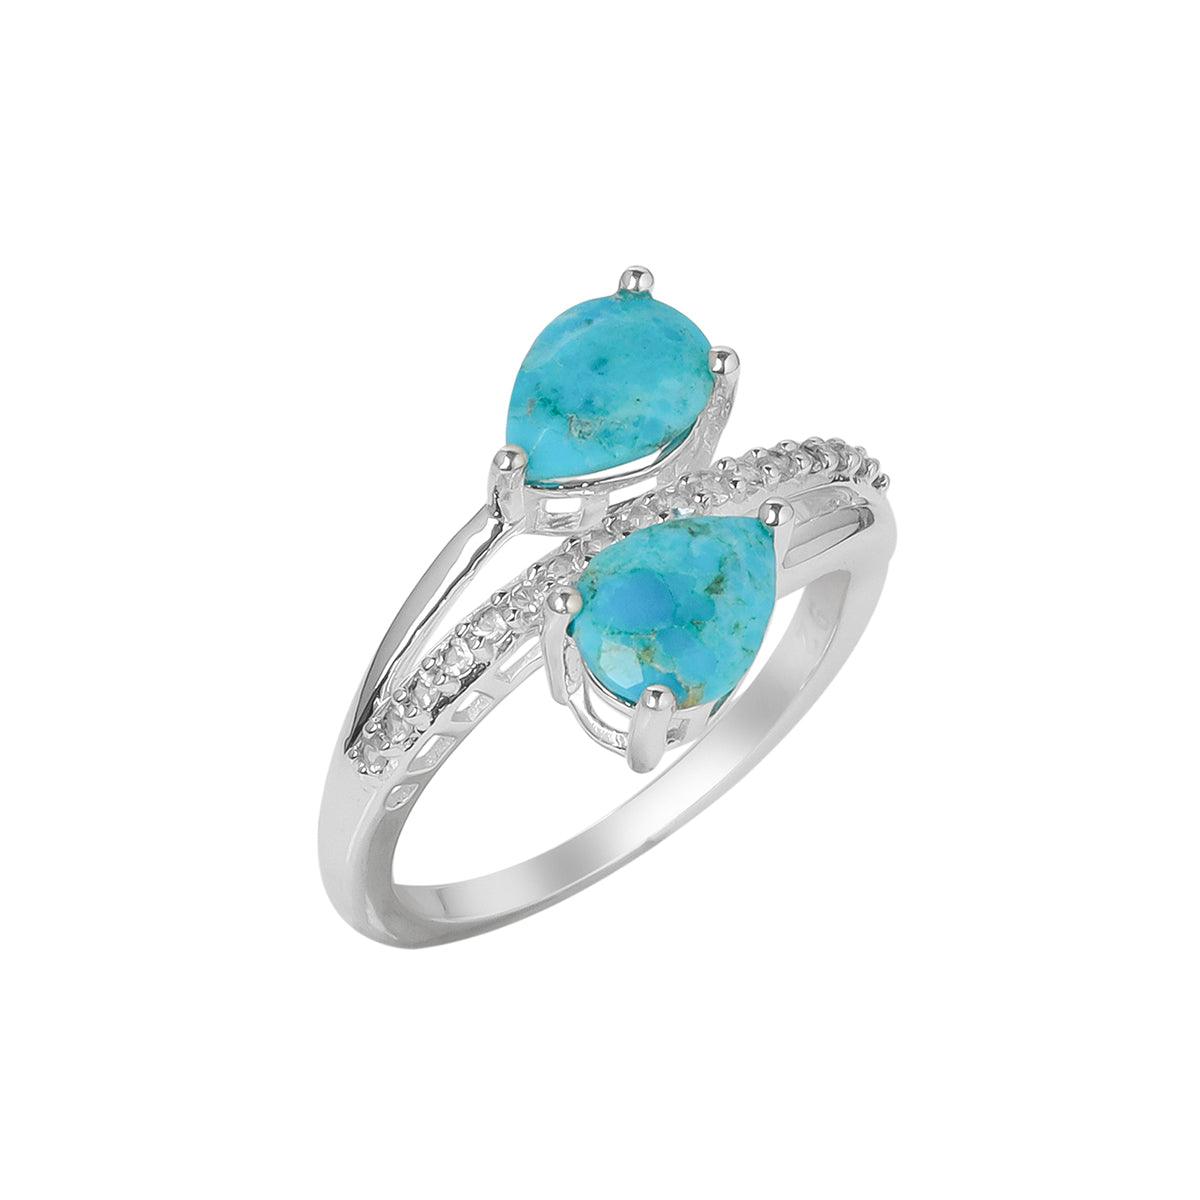 Turquoise & Swiss Blue Topaz 925 Sterling Silver Engagement Ring - YoTreasure